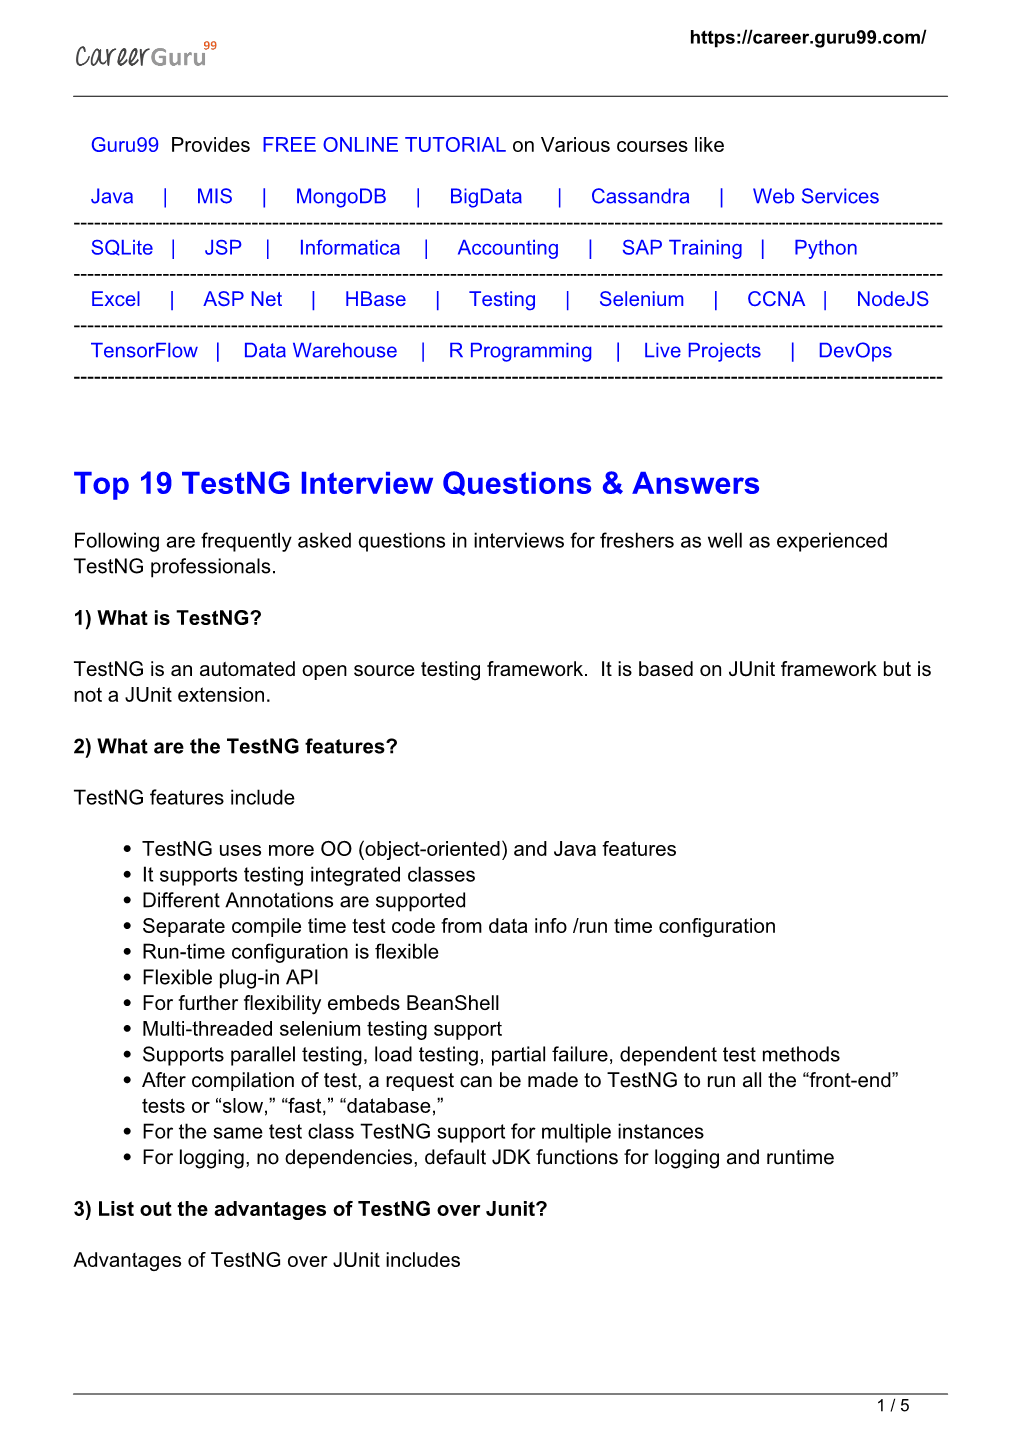 Top 19 Testng Interview Questions & Answers